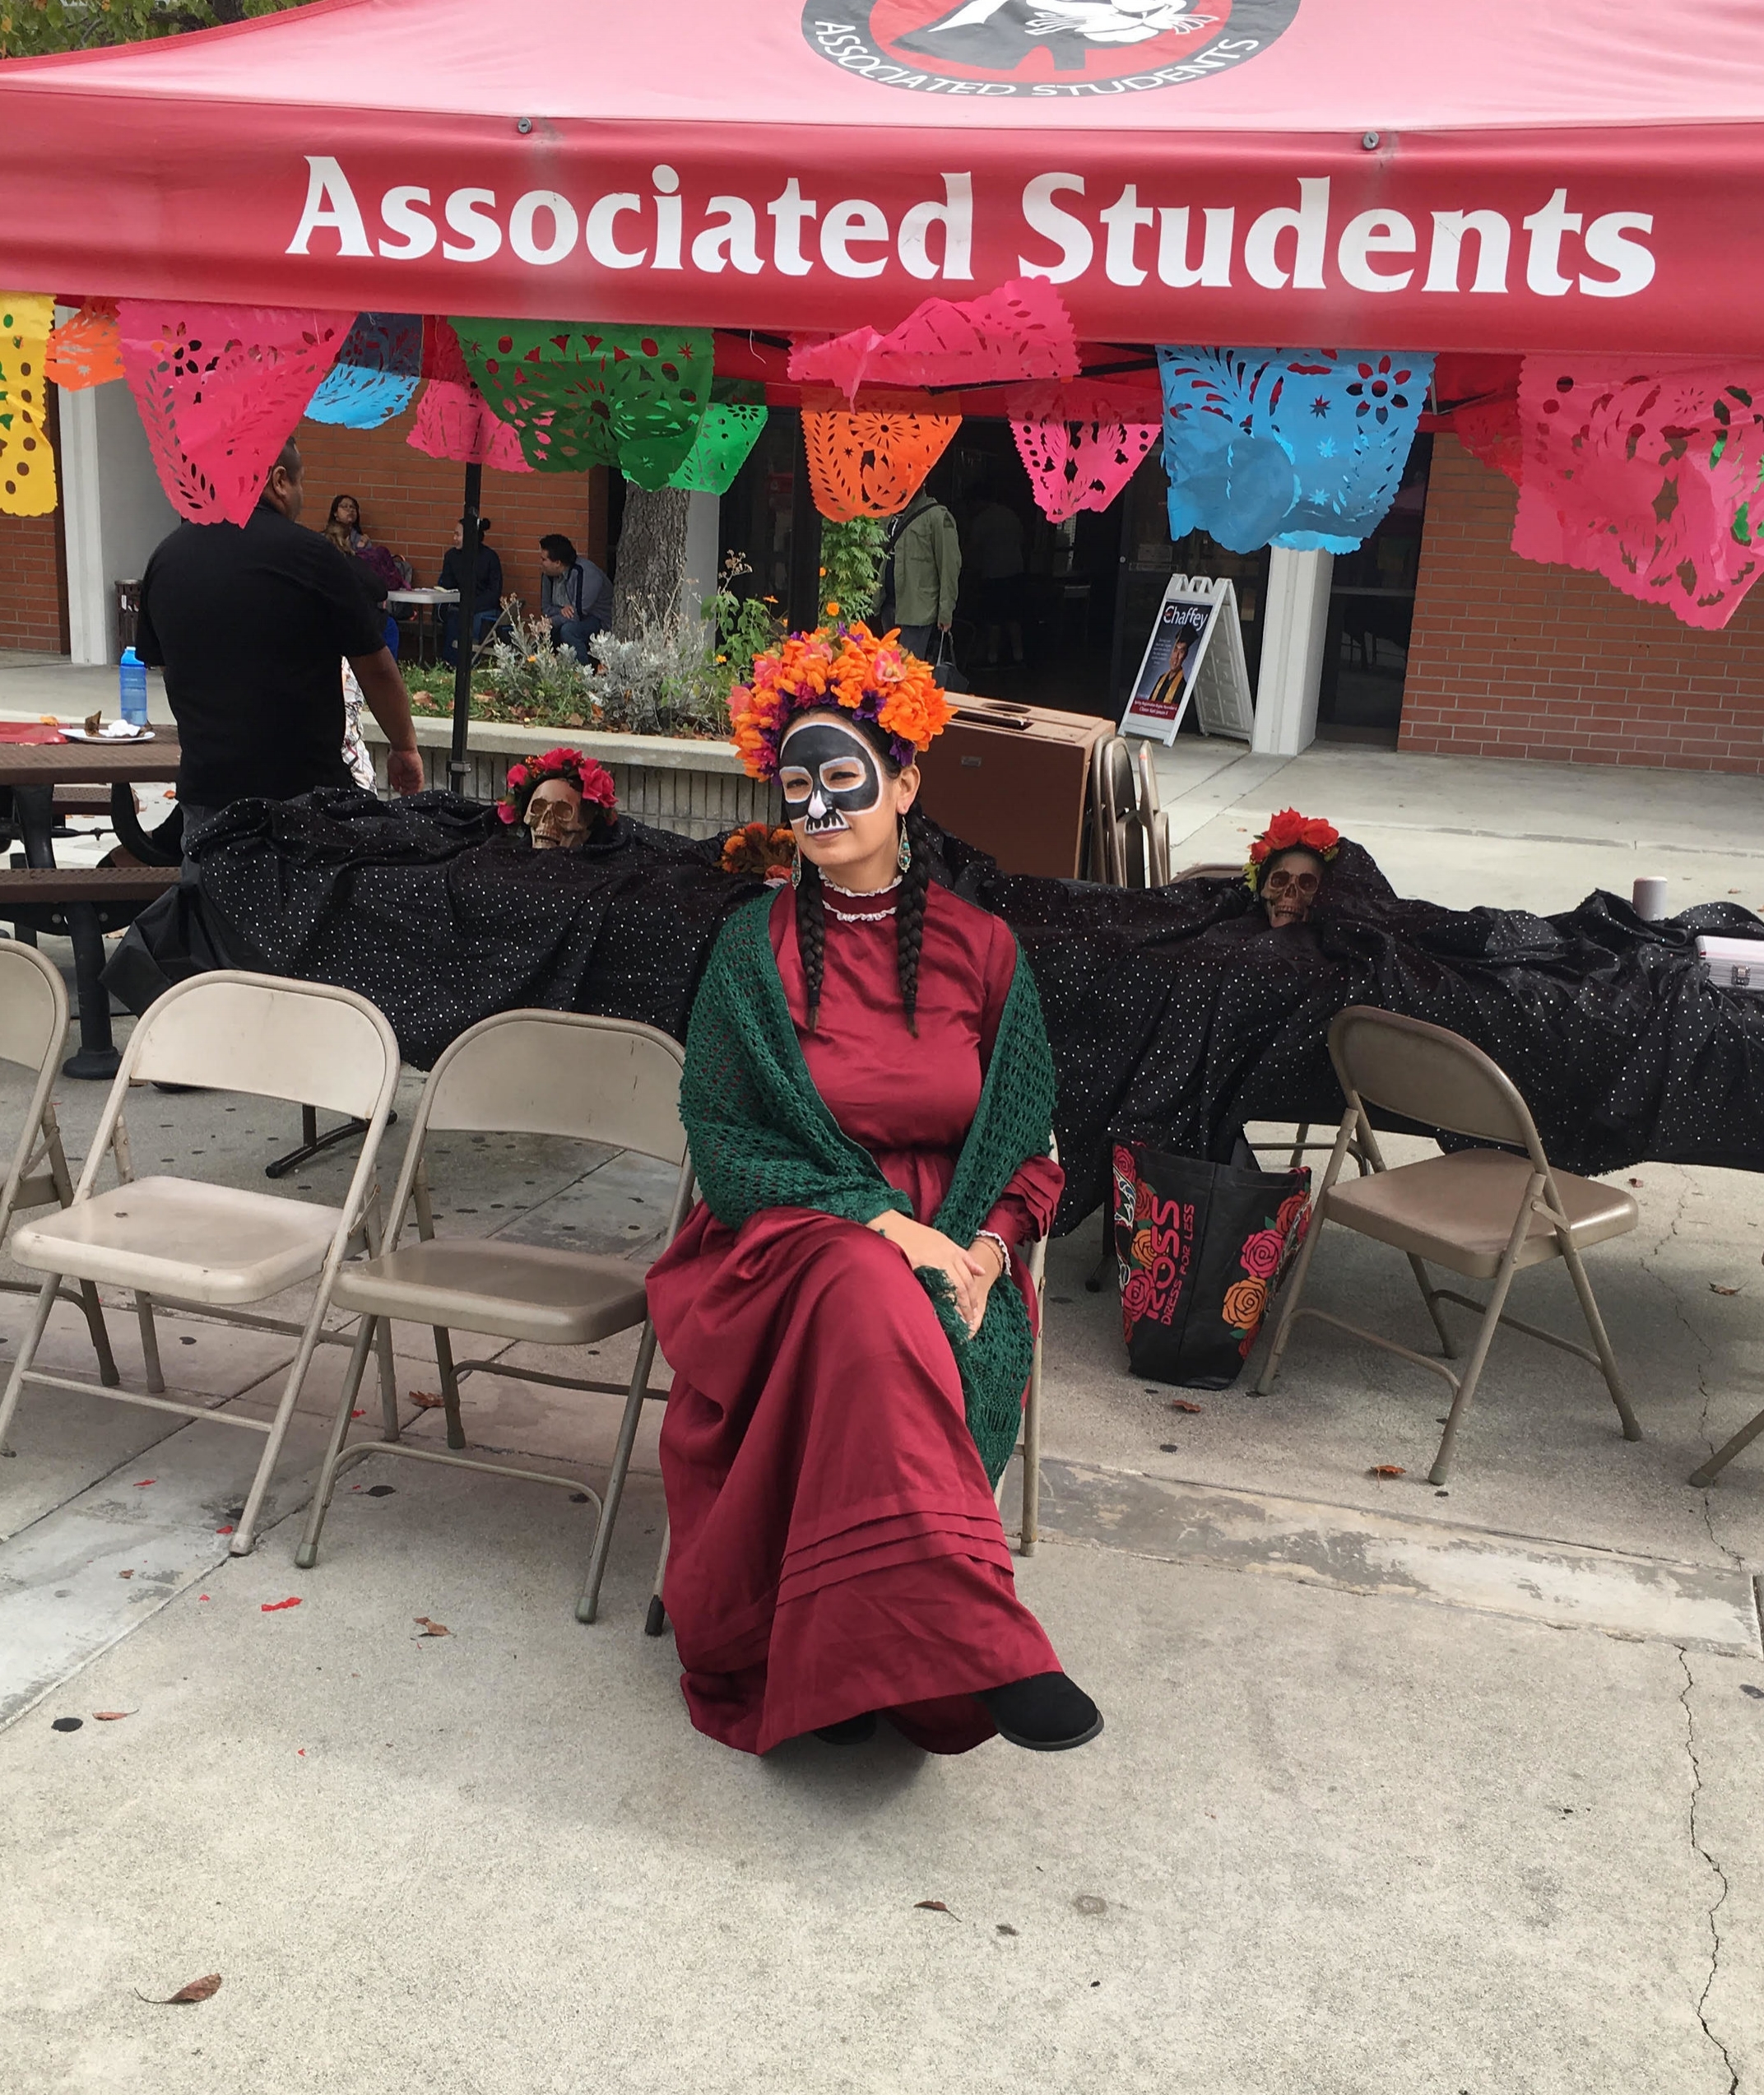  Stephanie Salas painted in the style of La Catrina, and student at The Academy of the Arts in El Sereno, attends the Chaffey College Day of the Dead event.&nbsp;Every year the Wignall Museum at Chaffey College has promoted The Day of the Dead event 